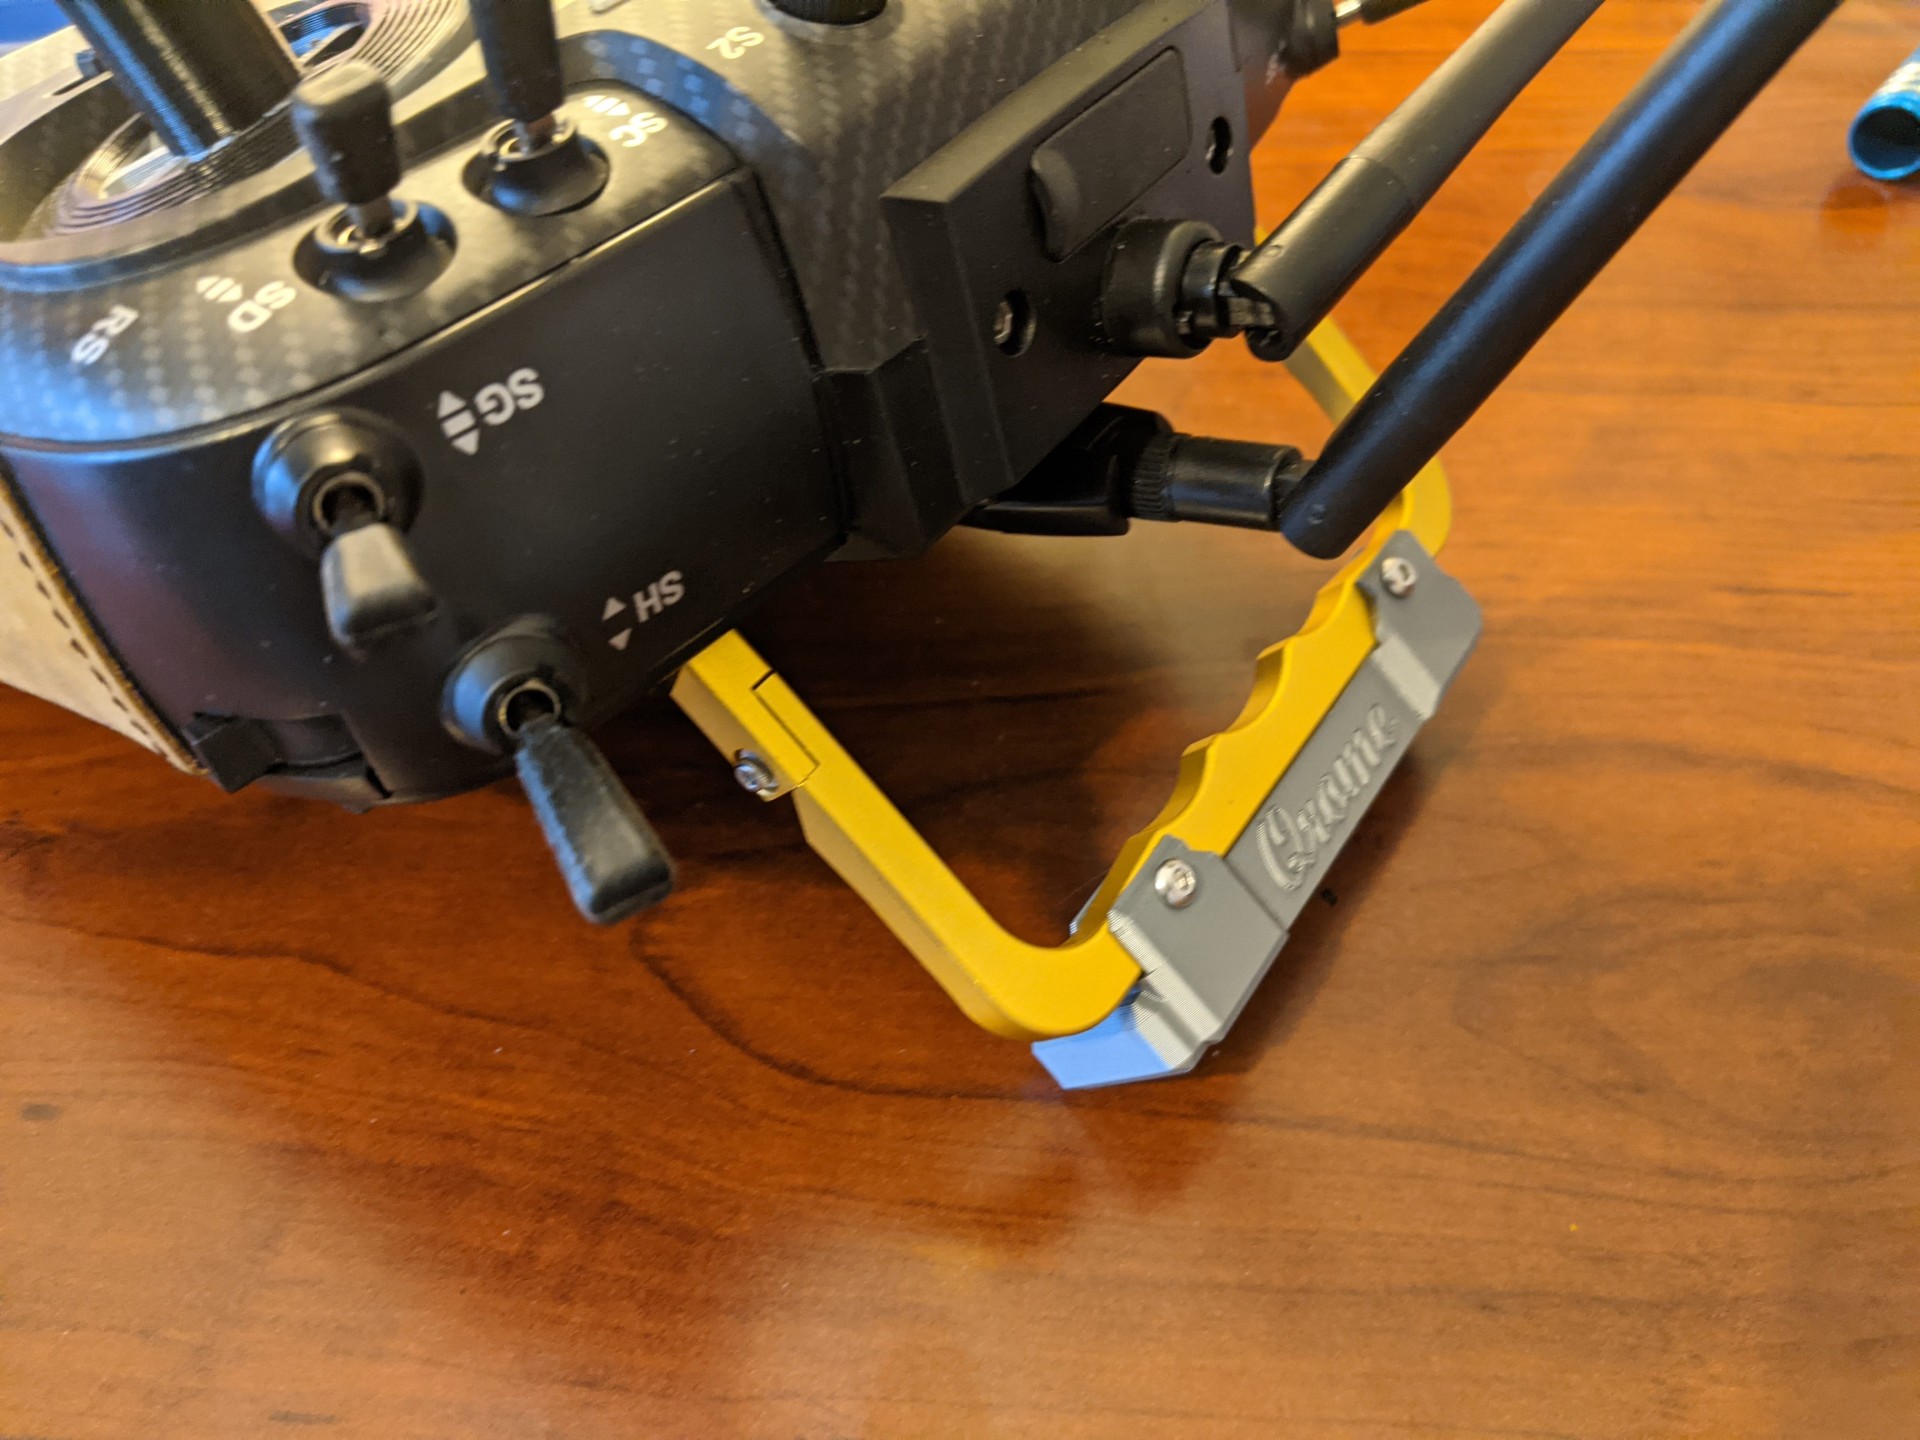 TX16S Folding Stand Extender and Module Protector